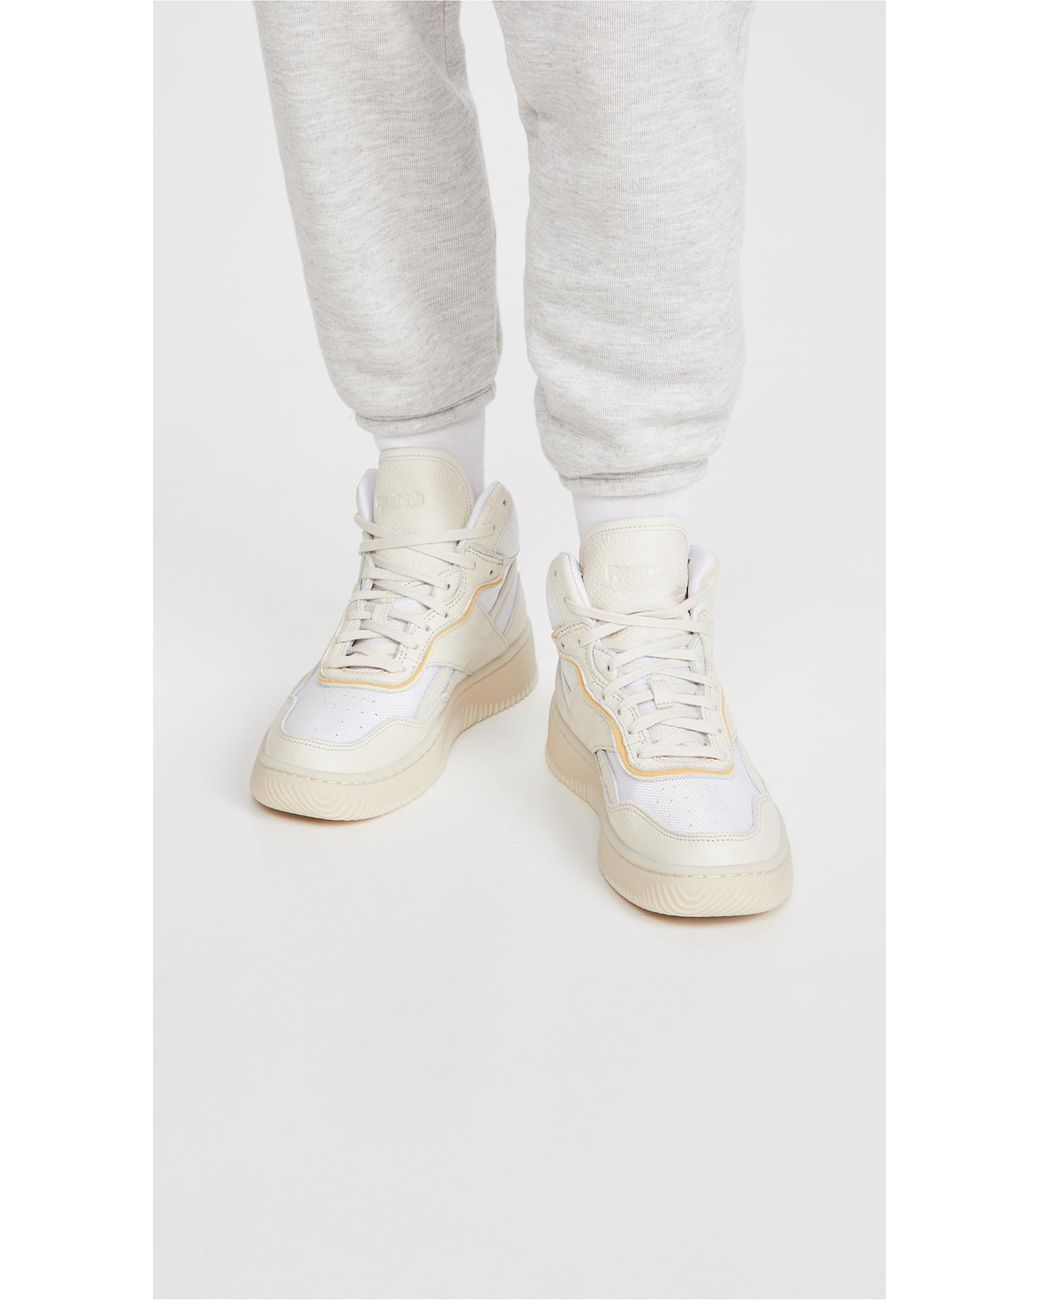 Reebok X Victoria Beckham Dual Court Mid Ii Vb Sneakers in White | Lyst